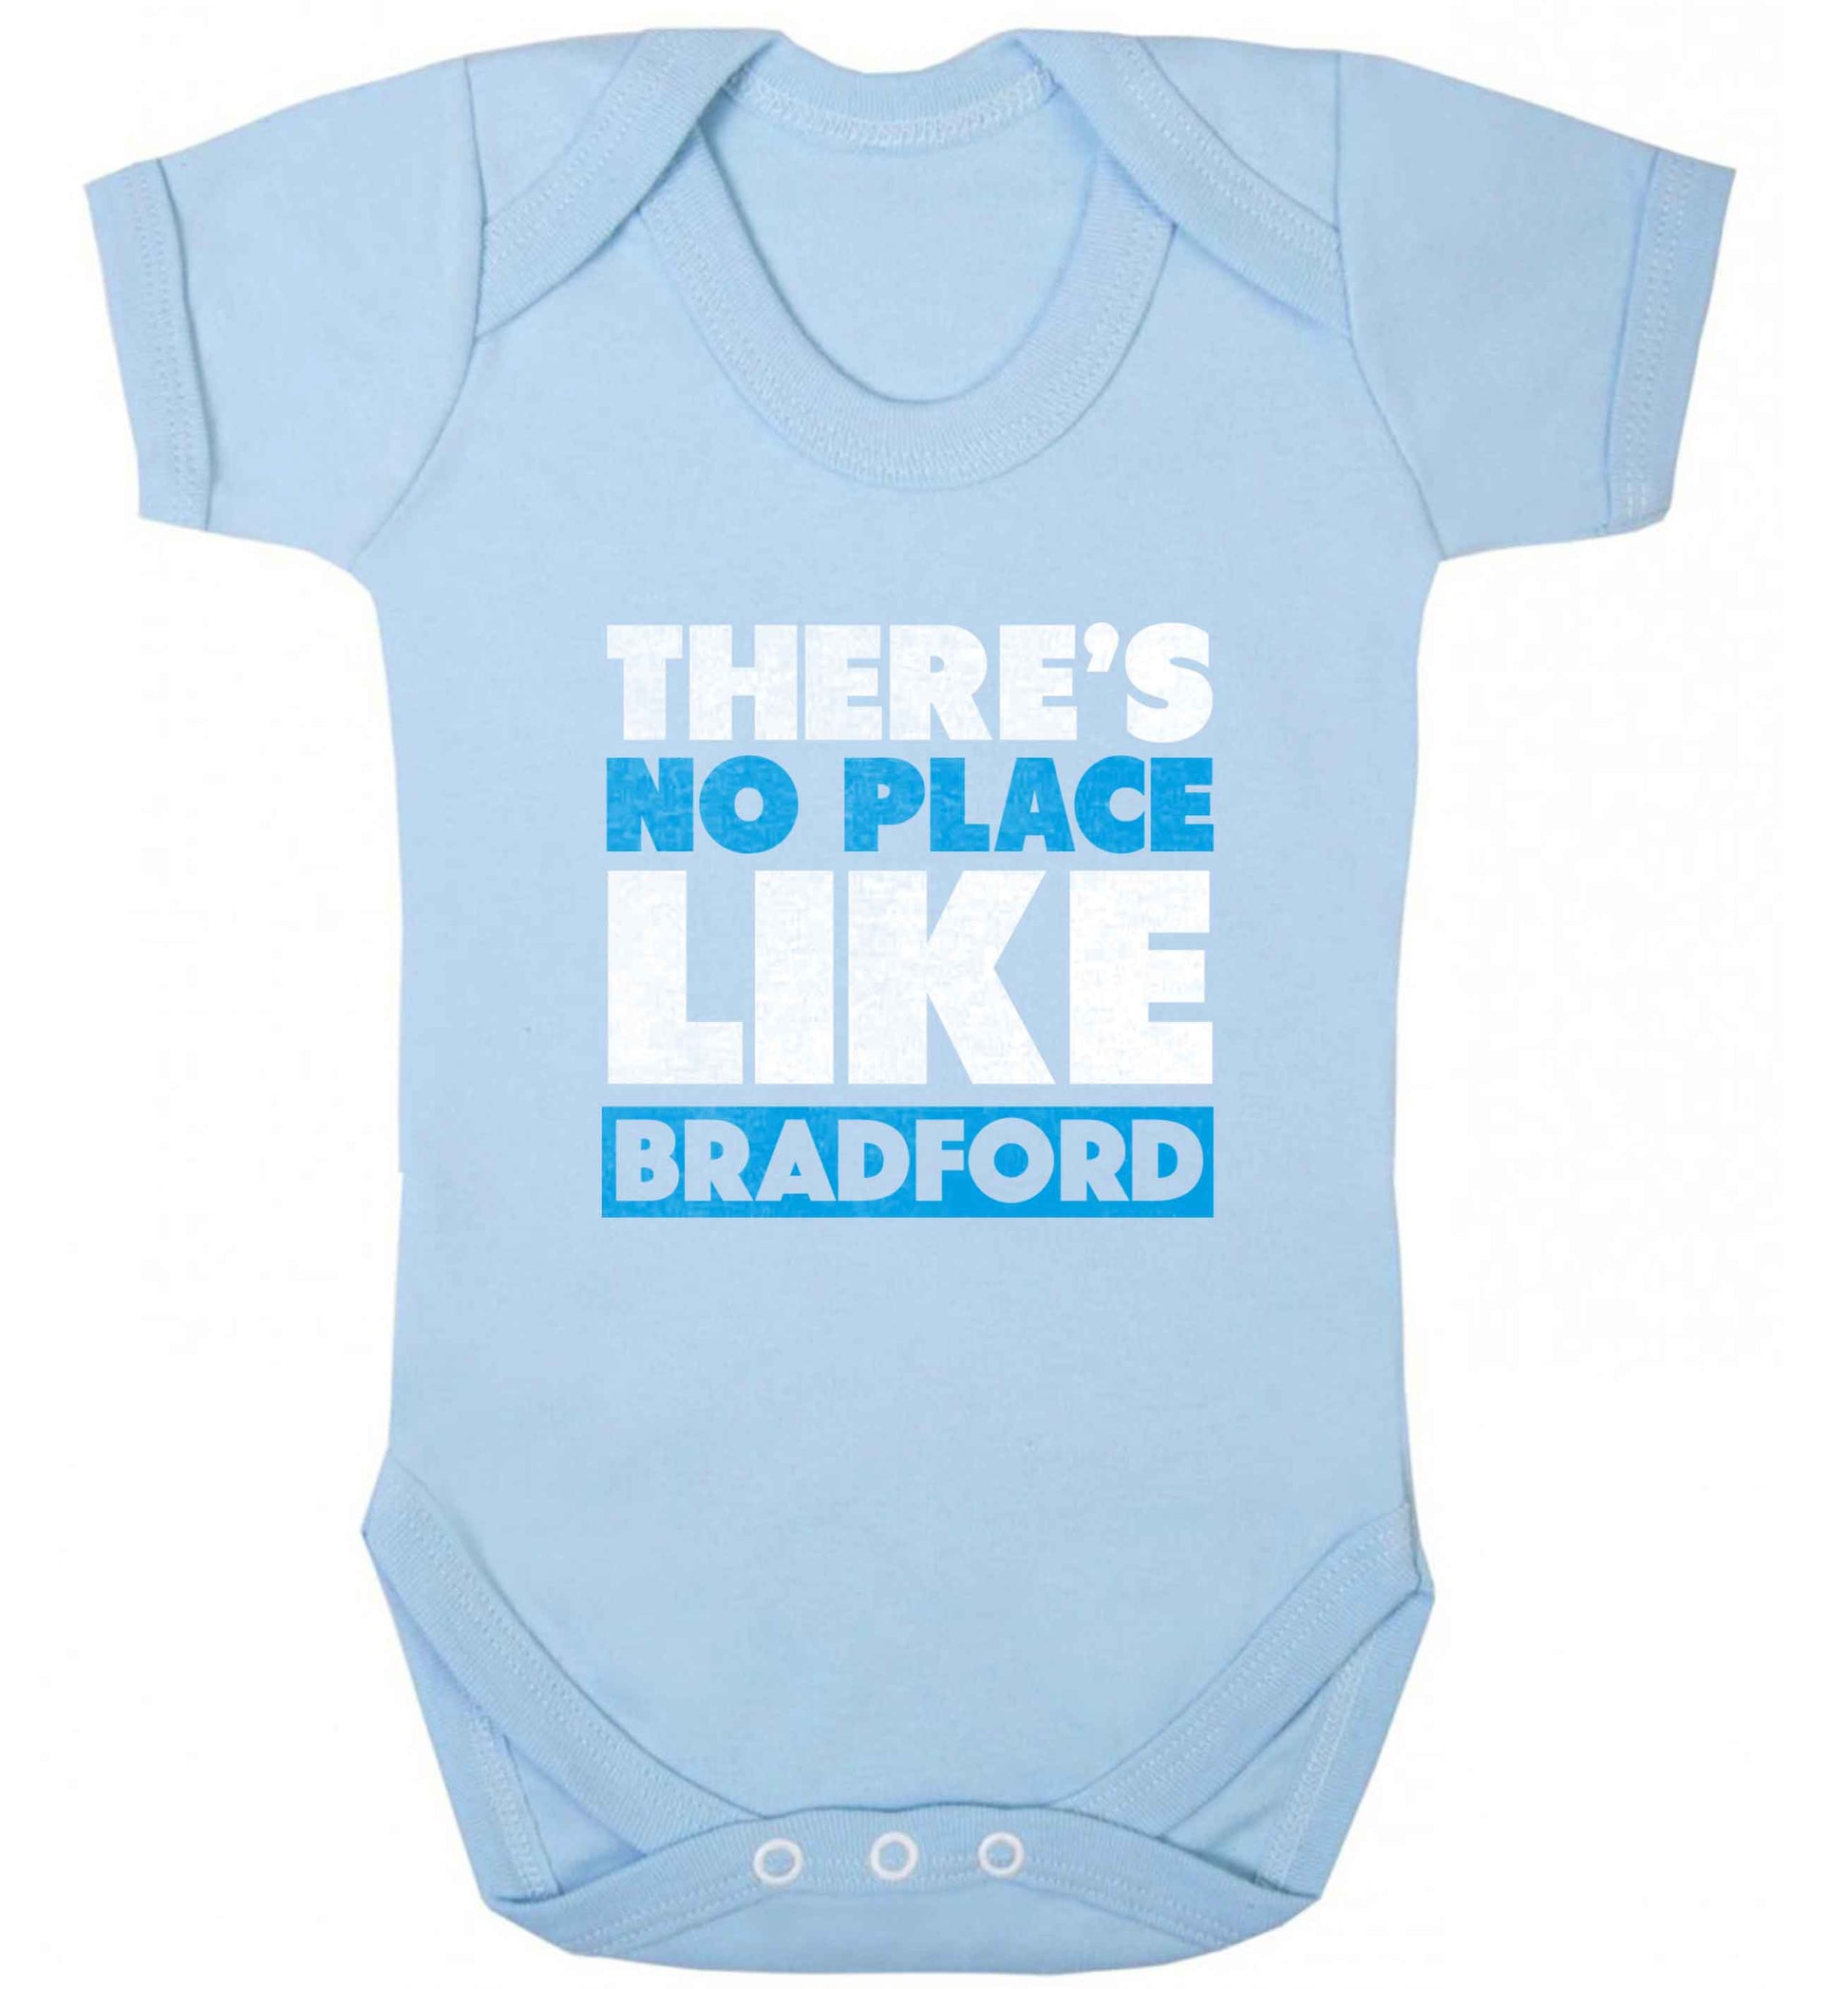 There's no place like Bradford baby vest pale blue 18-24 months